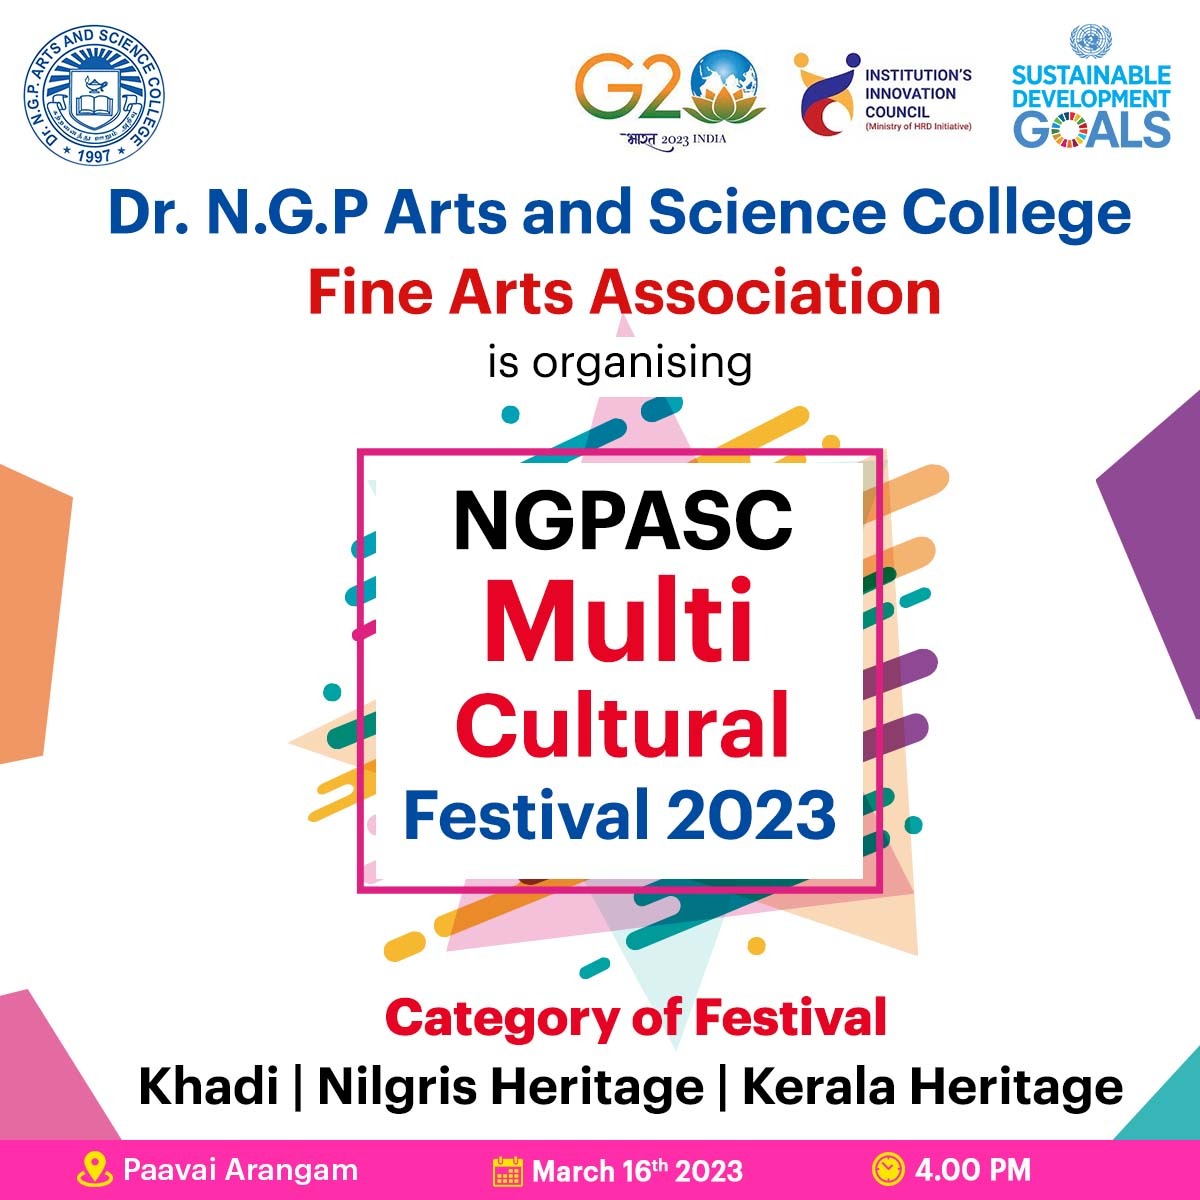 Dr. N.G.P. Arts and Science College cordially invite you all to the grand 'Multi-Cultural Festival 2023', organized by our Fine Arts Association. 
#NGPASC  #MultiCulturalFestival2023 #FineArtsAssociation #Khadi #NilgirisHeritage #KeralaHeritage #IIC #InstitutionsInnovationCouncil